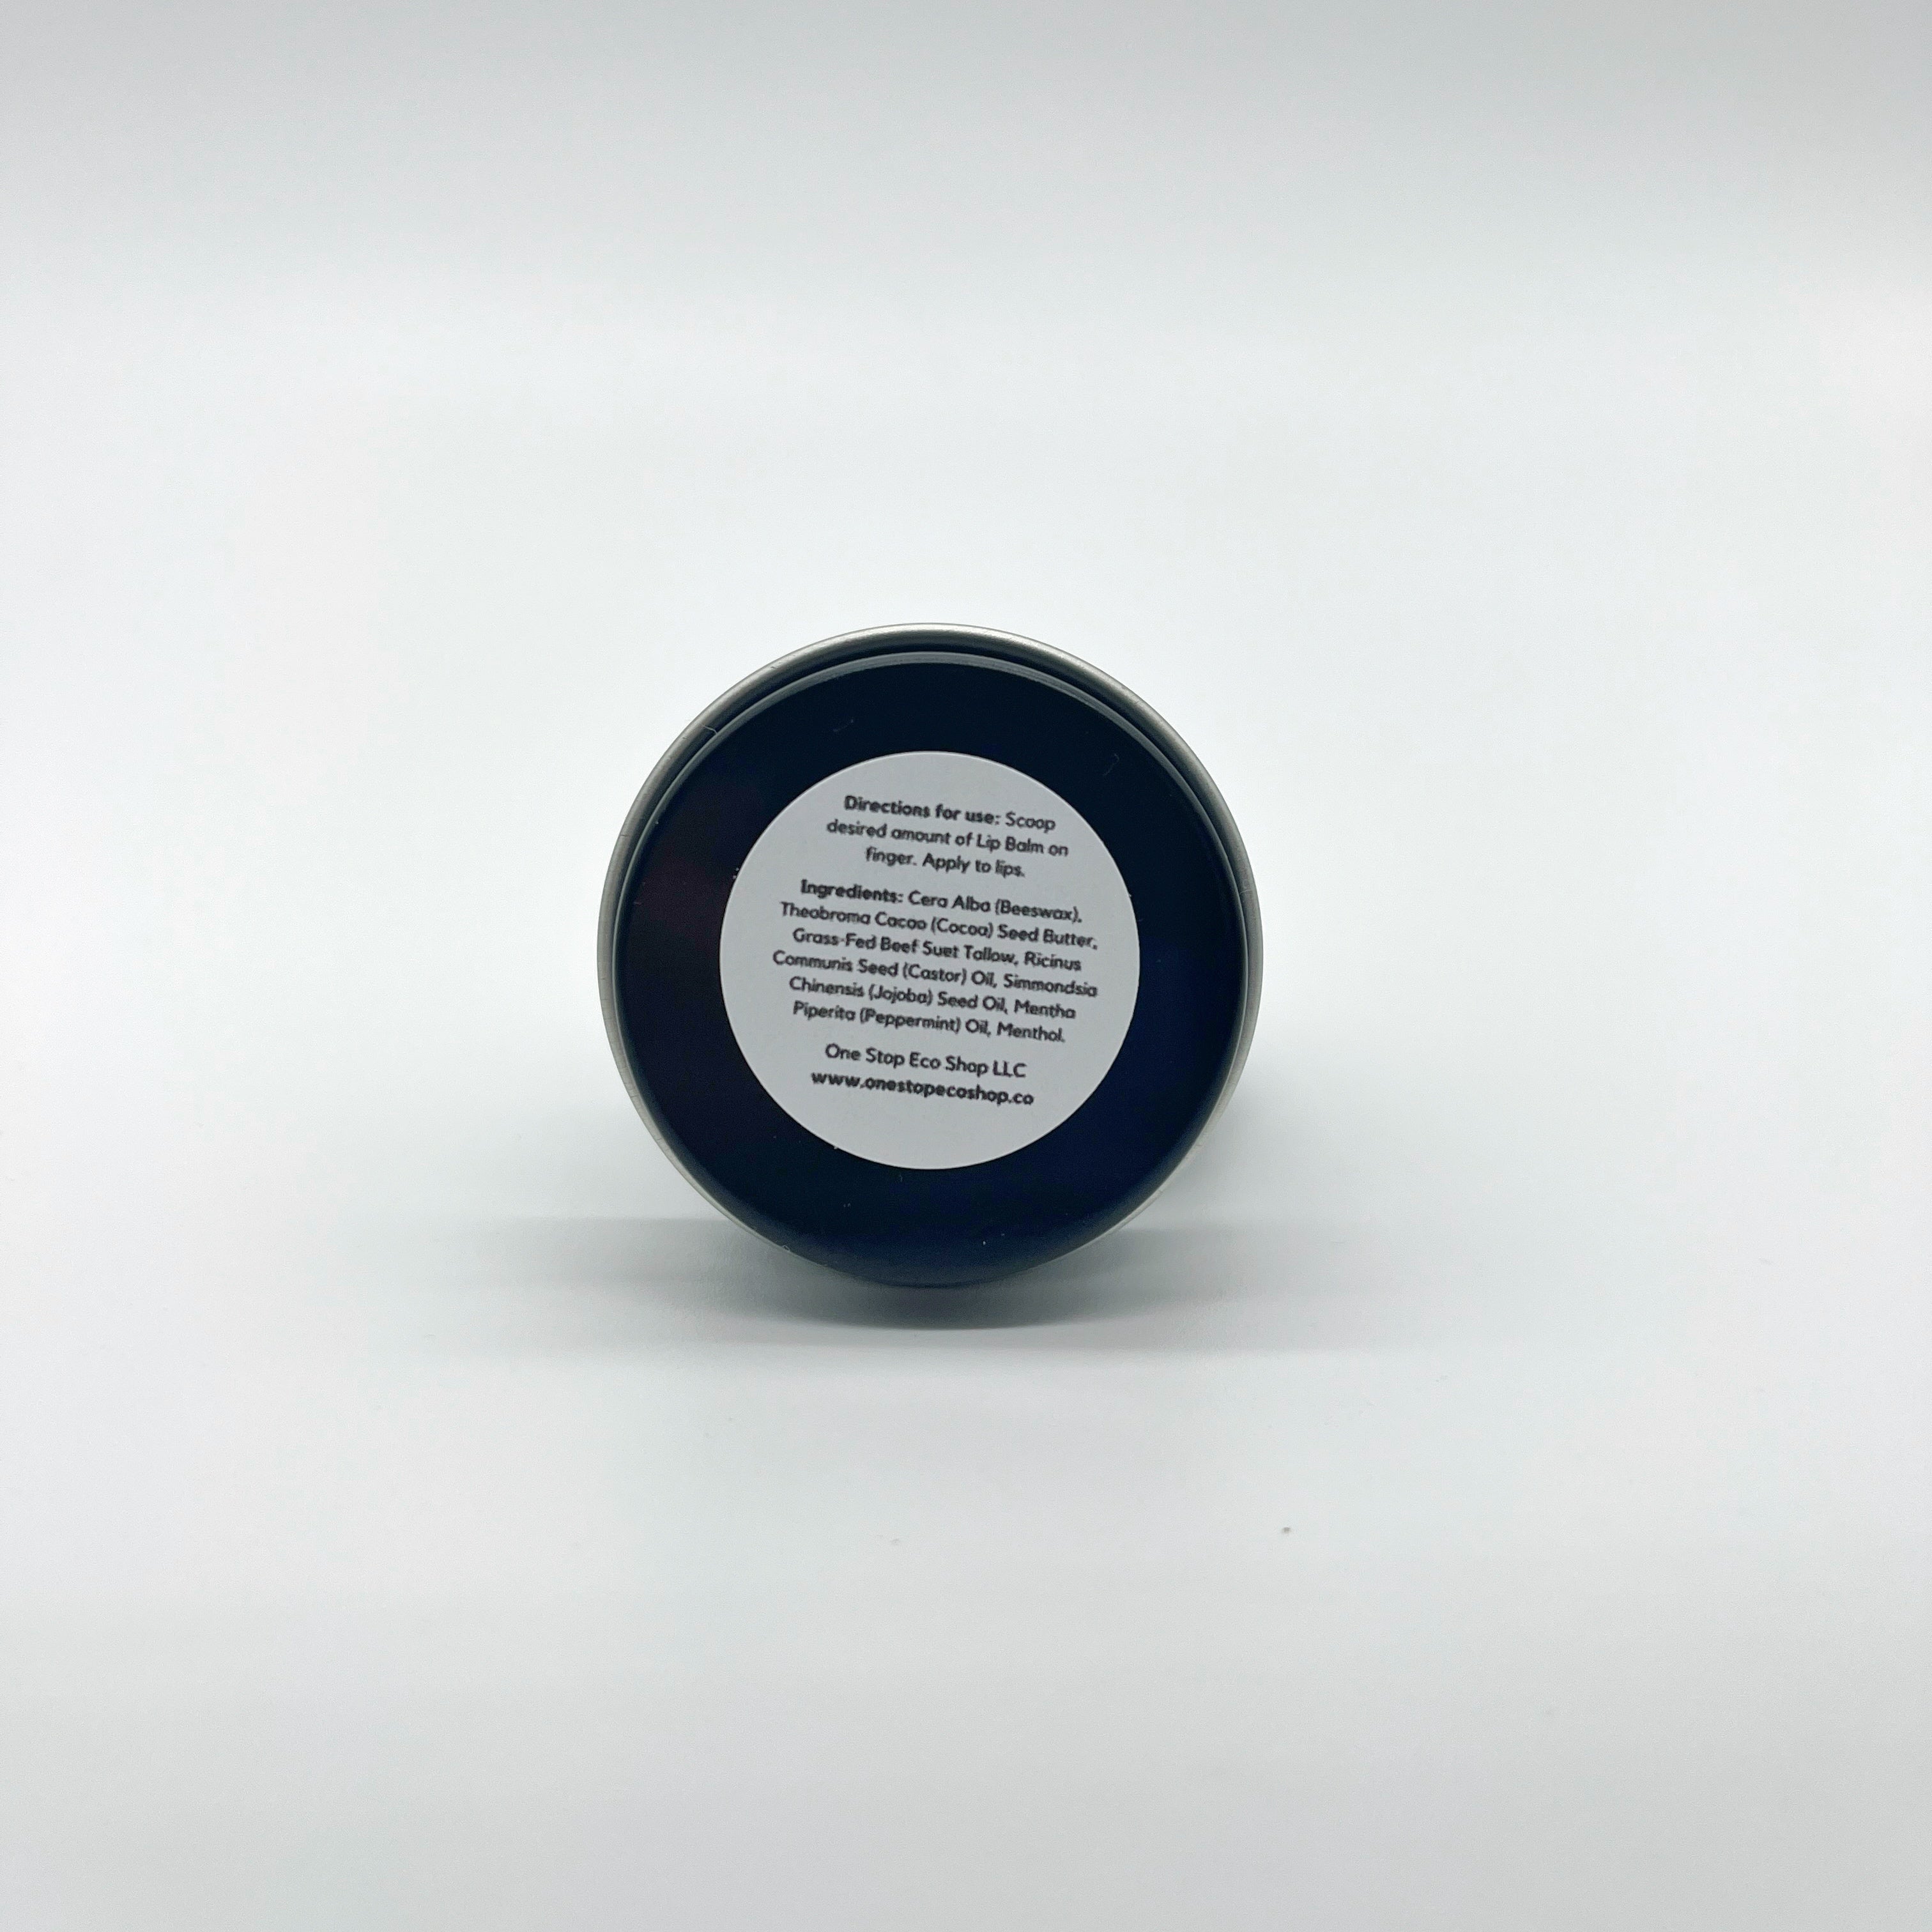 Tallow Lip Balm | Peppermint Scented